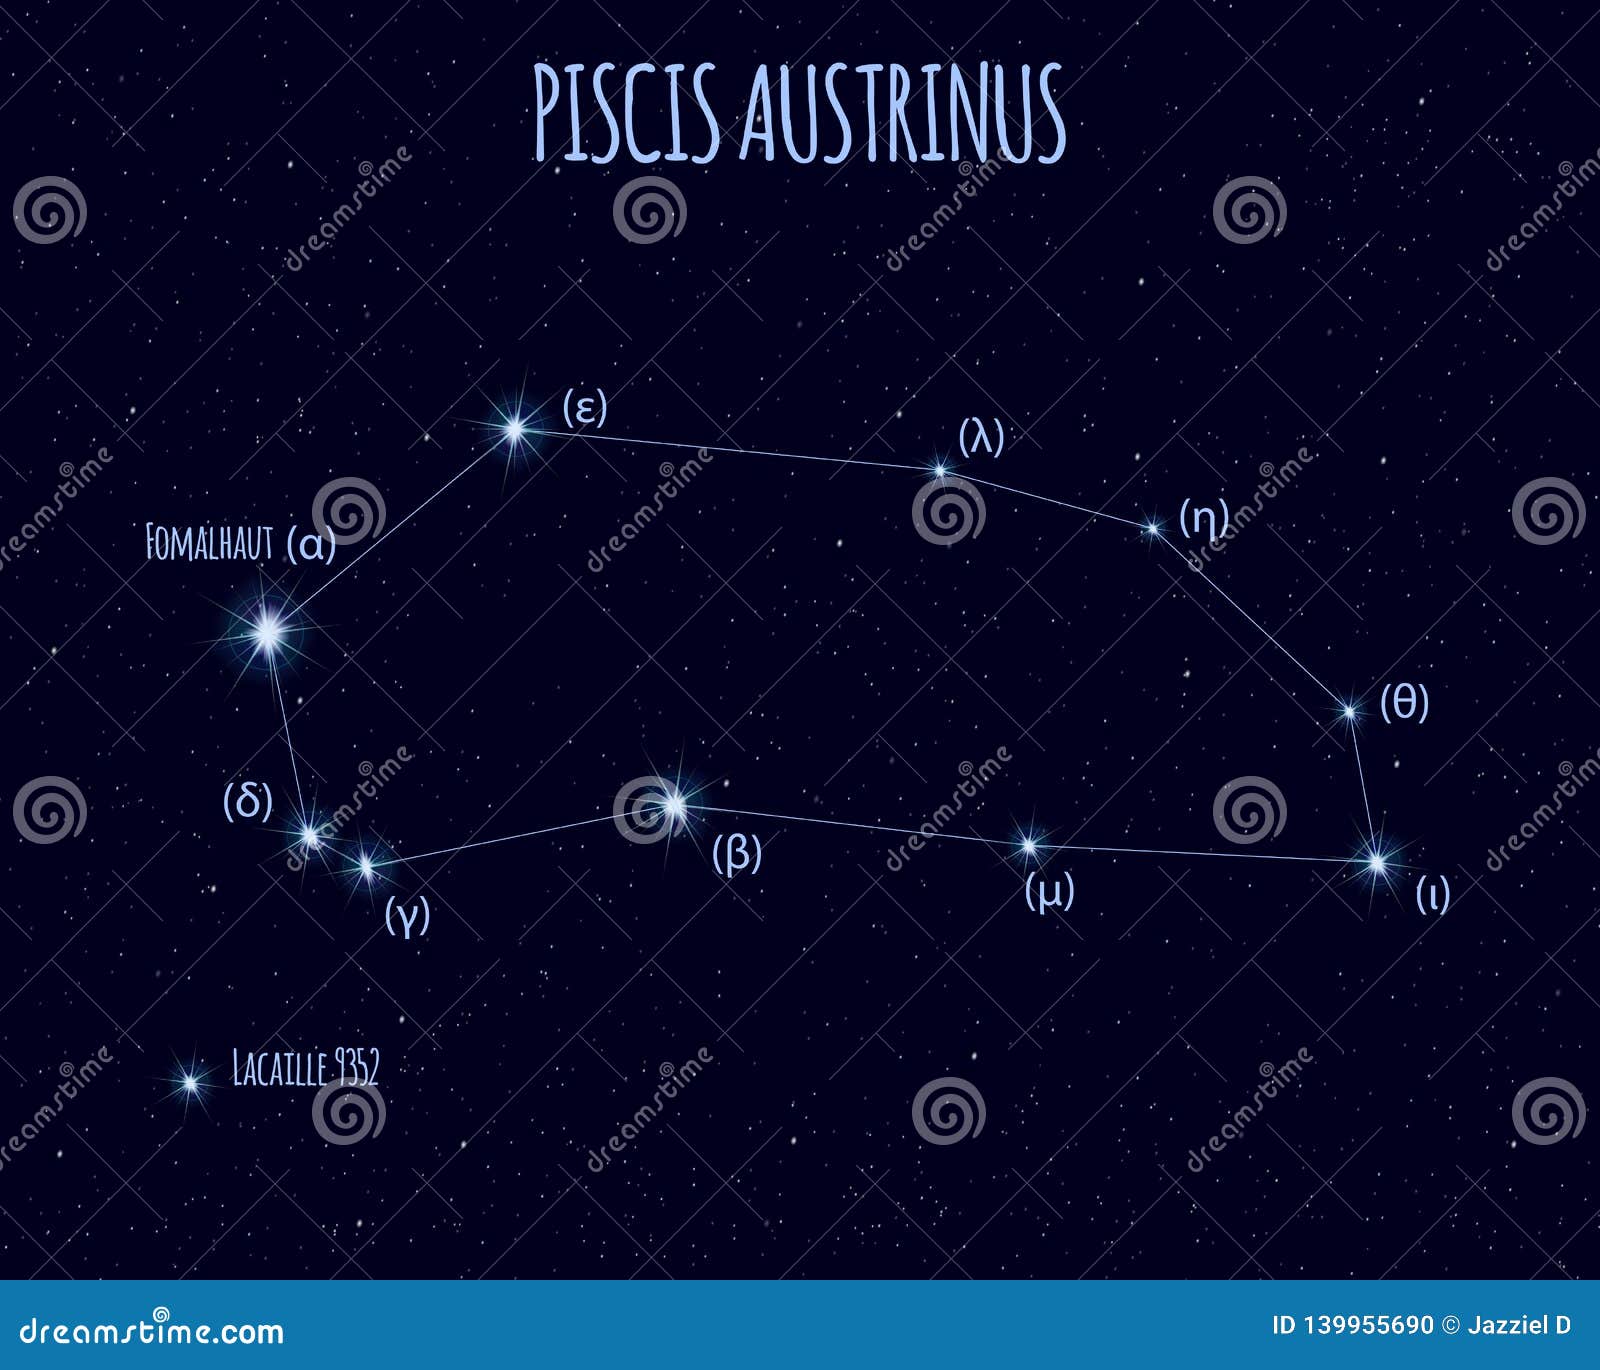 piscis austrinus constellation,   with the names of basic stars